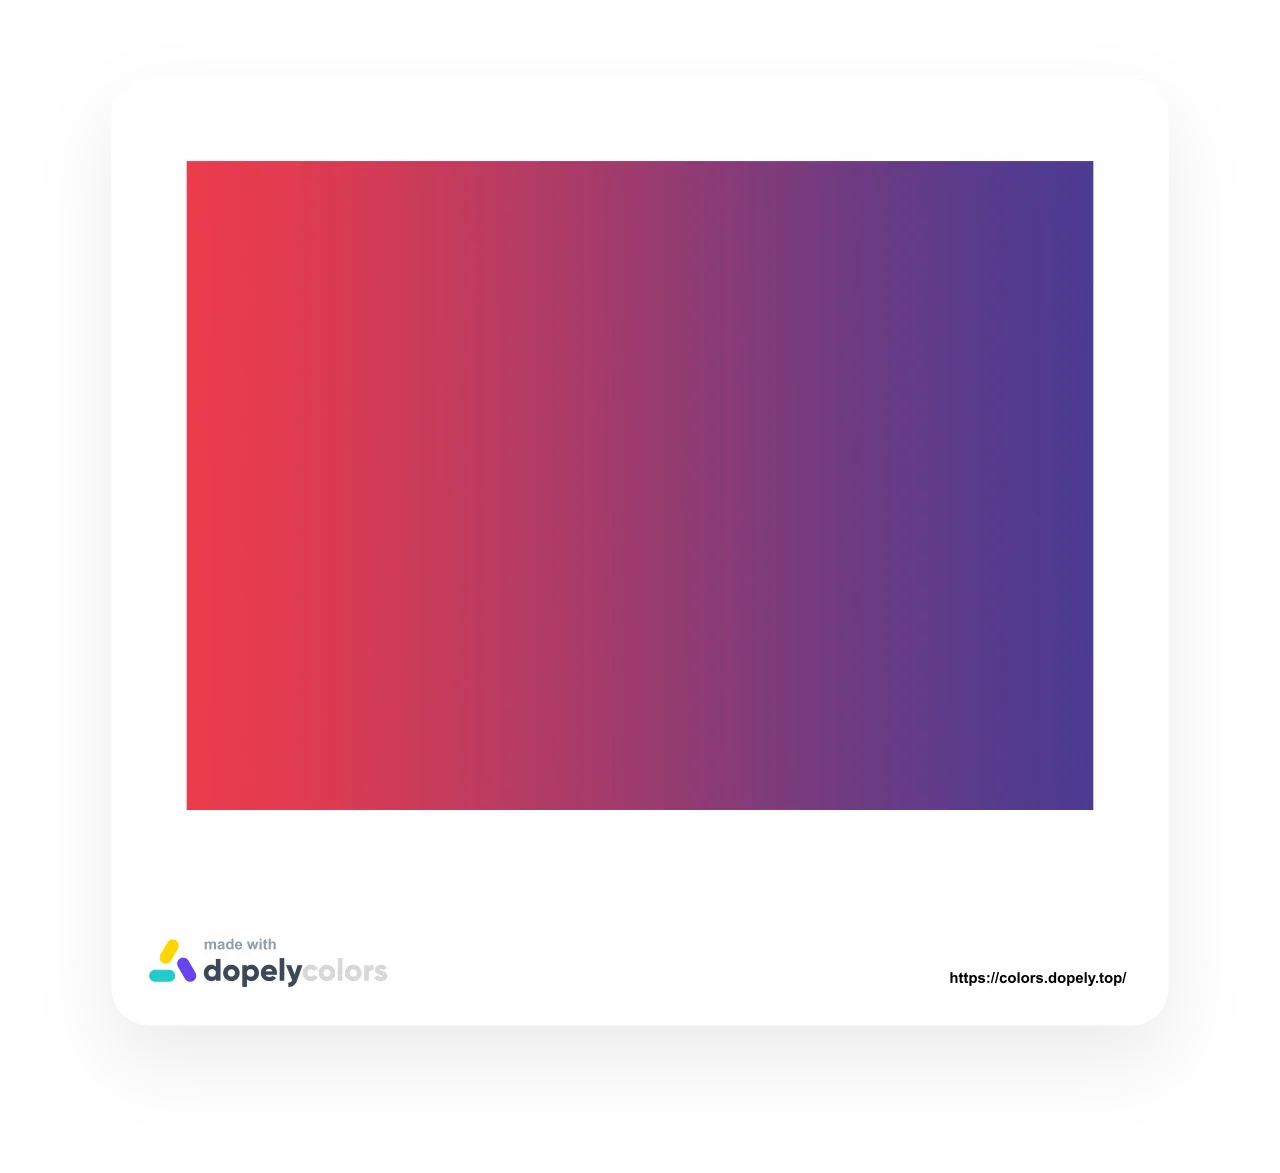 a linear gradient from red to purple with adobe photoshop or illustrator